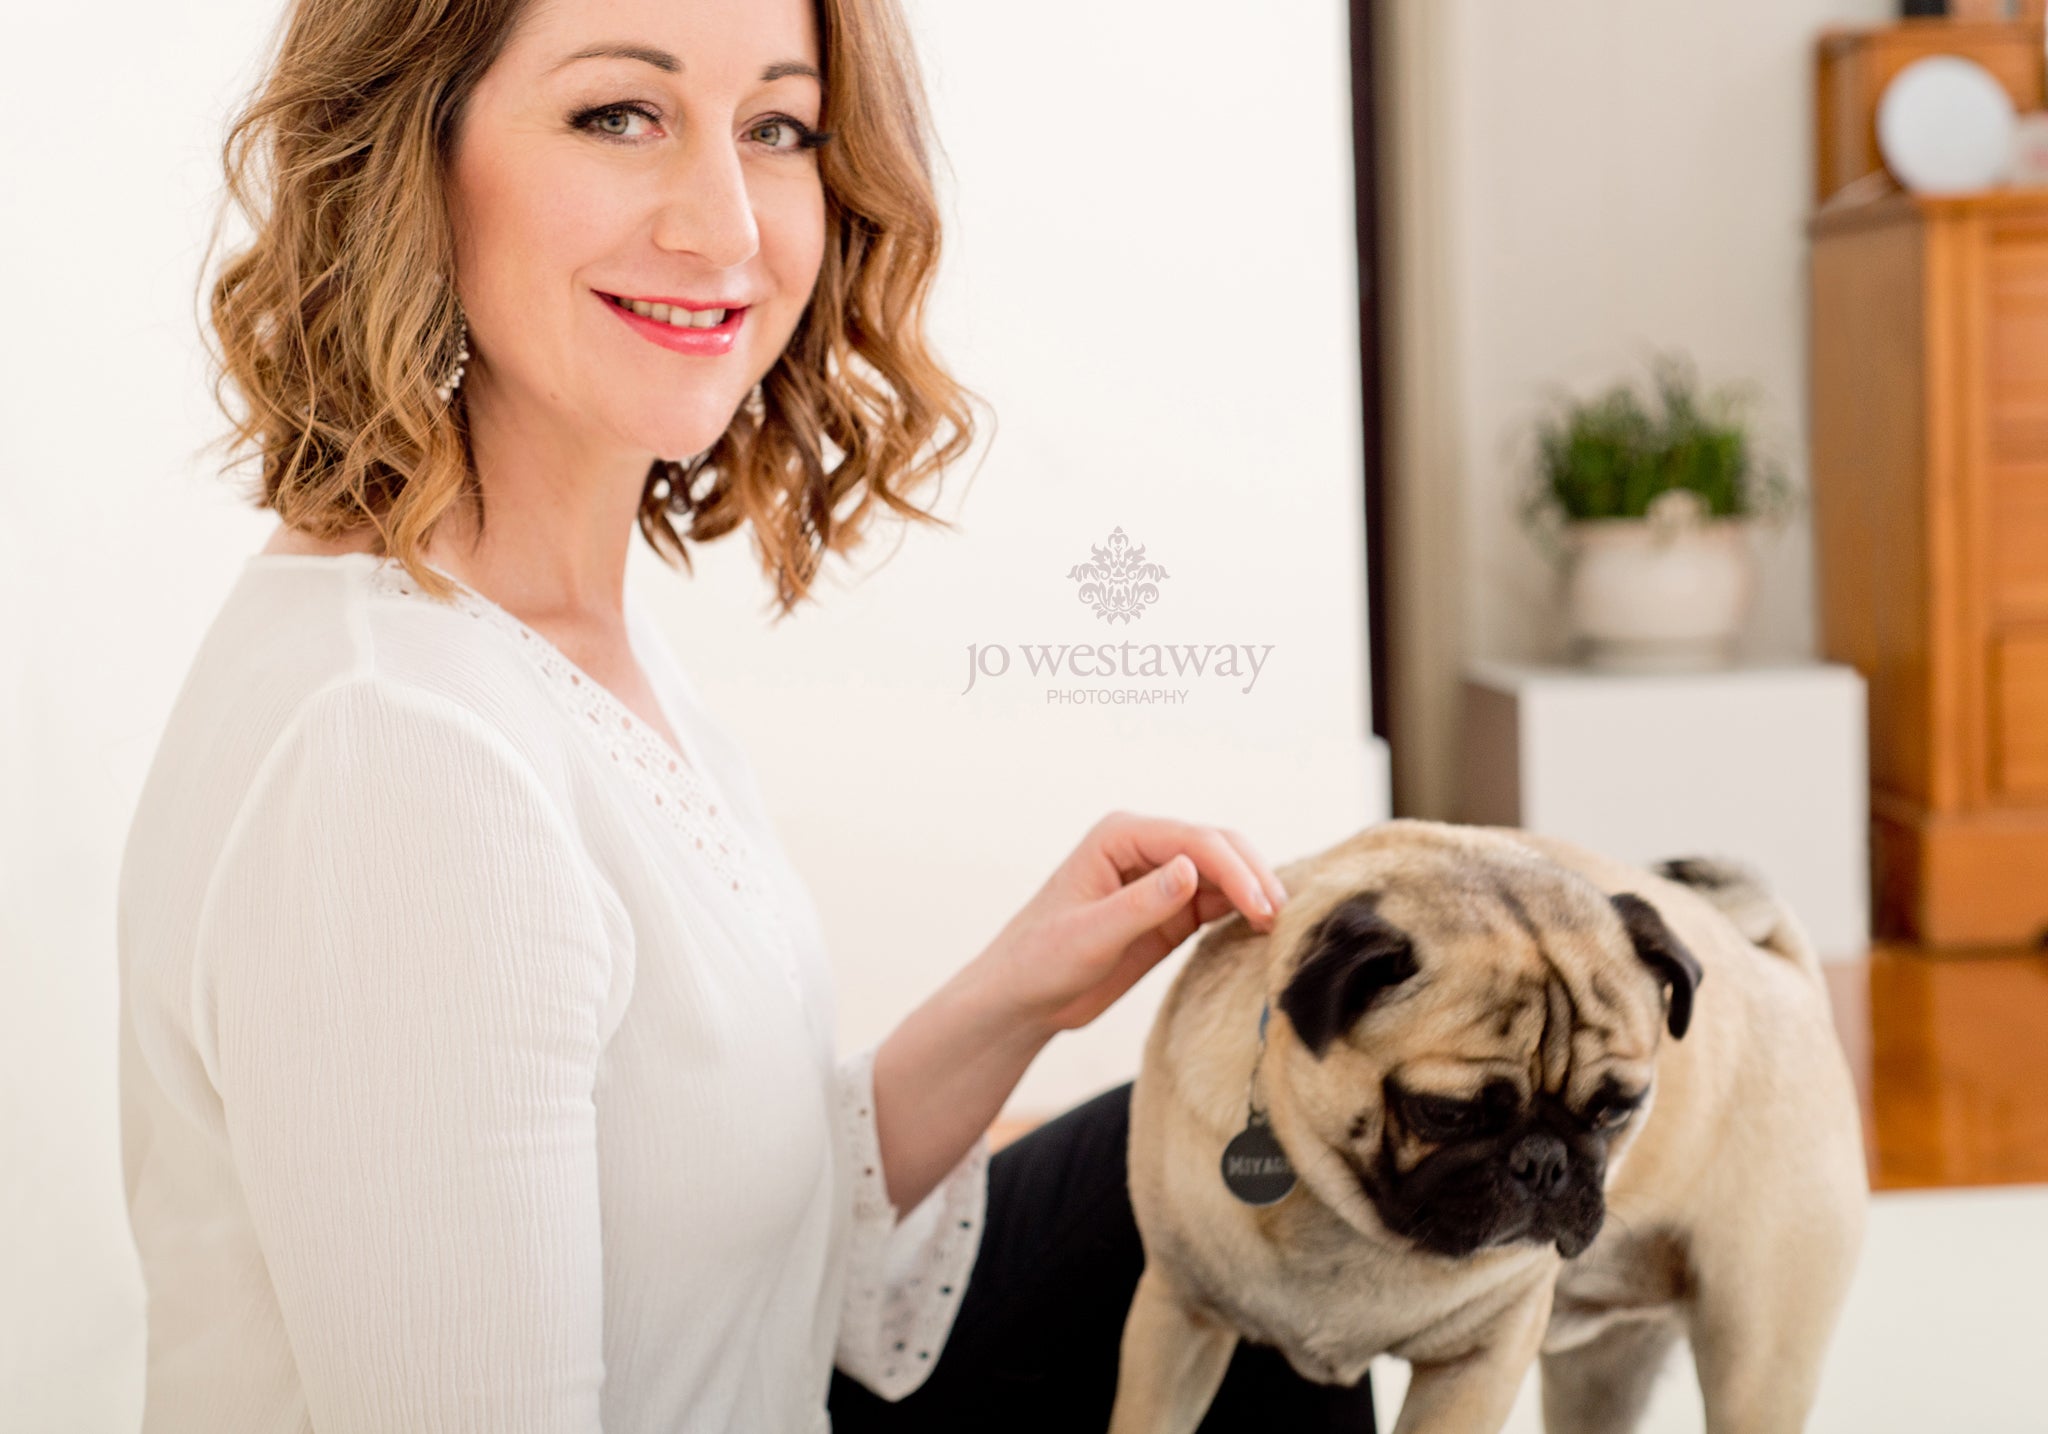 Pets in business and personal branding photography sessions - bring your dog to work